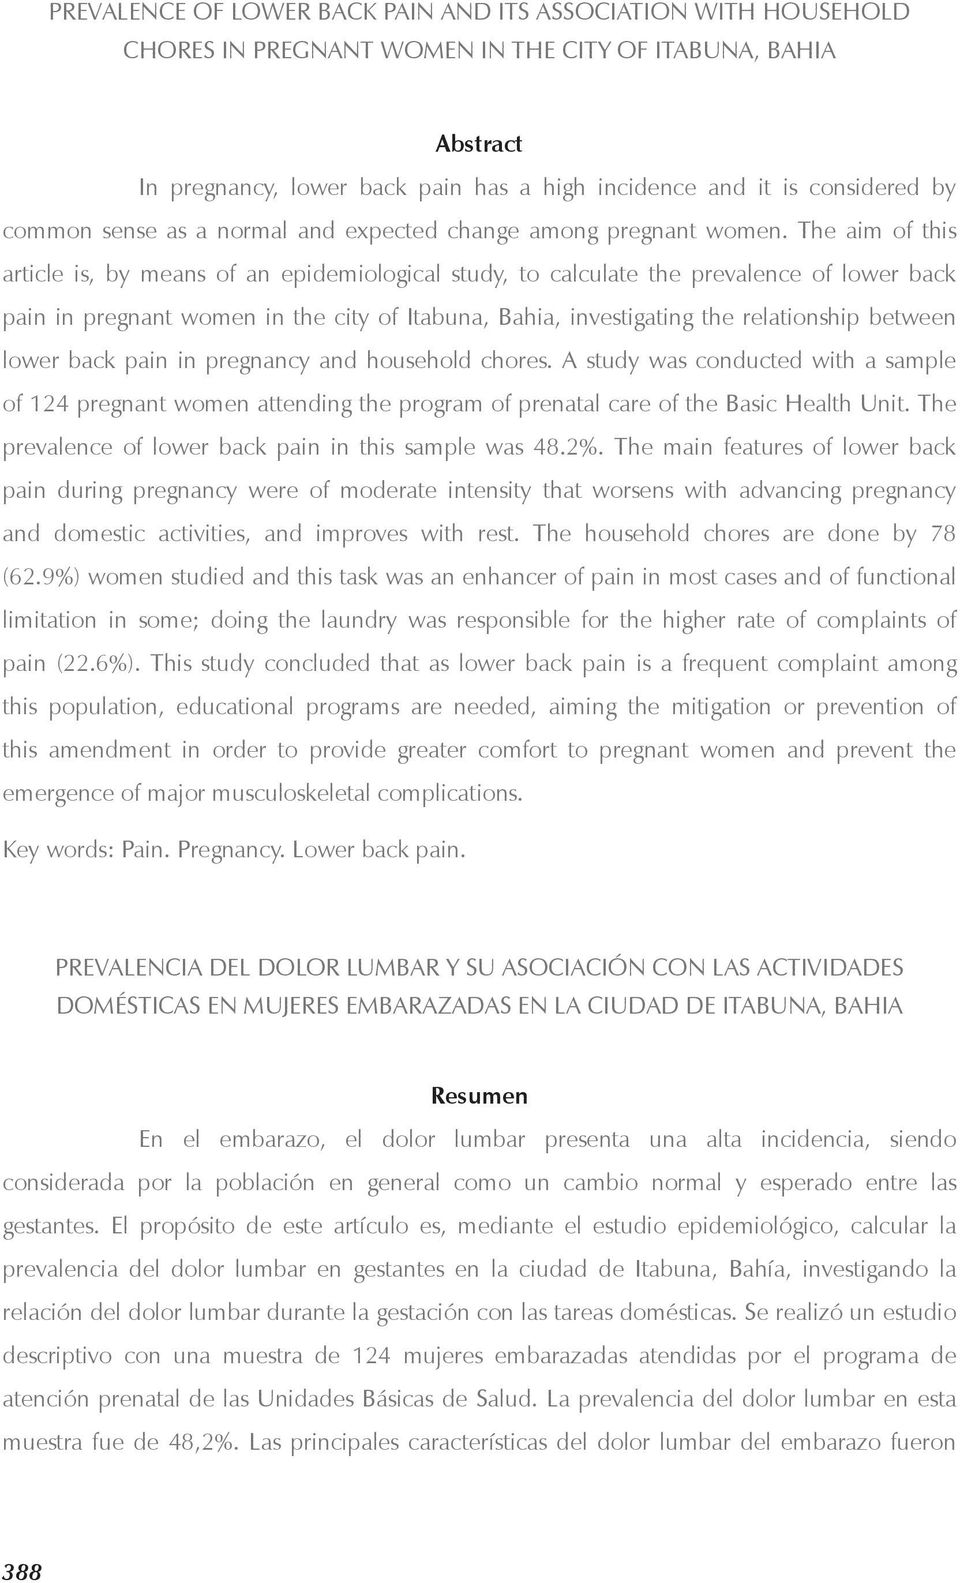 The aim of this article is, by means of an epidemiological study, to calculate the prevalence of lower back pain in pregnant women in the city of Itabuna, Bahia, investigating the relationship